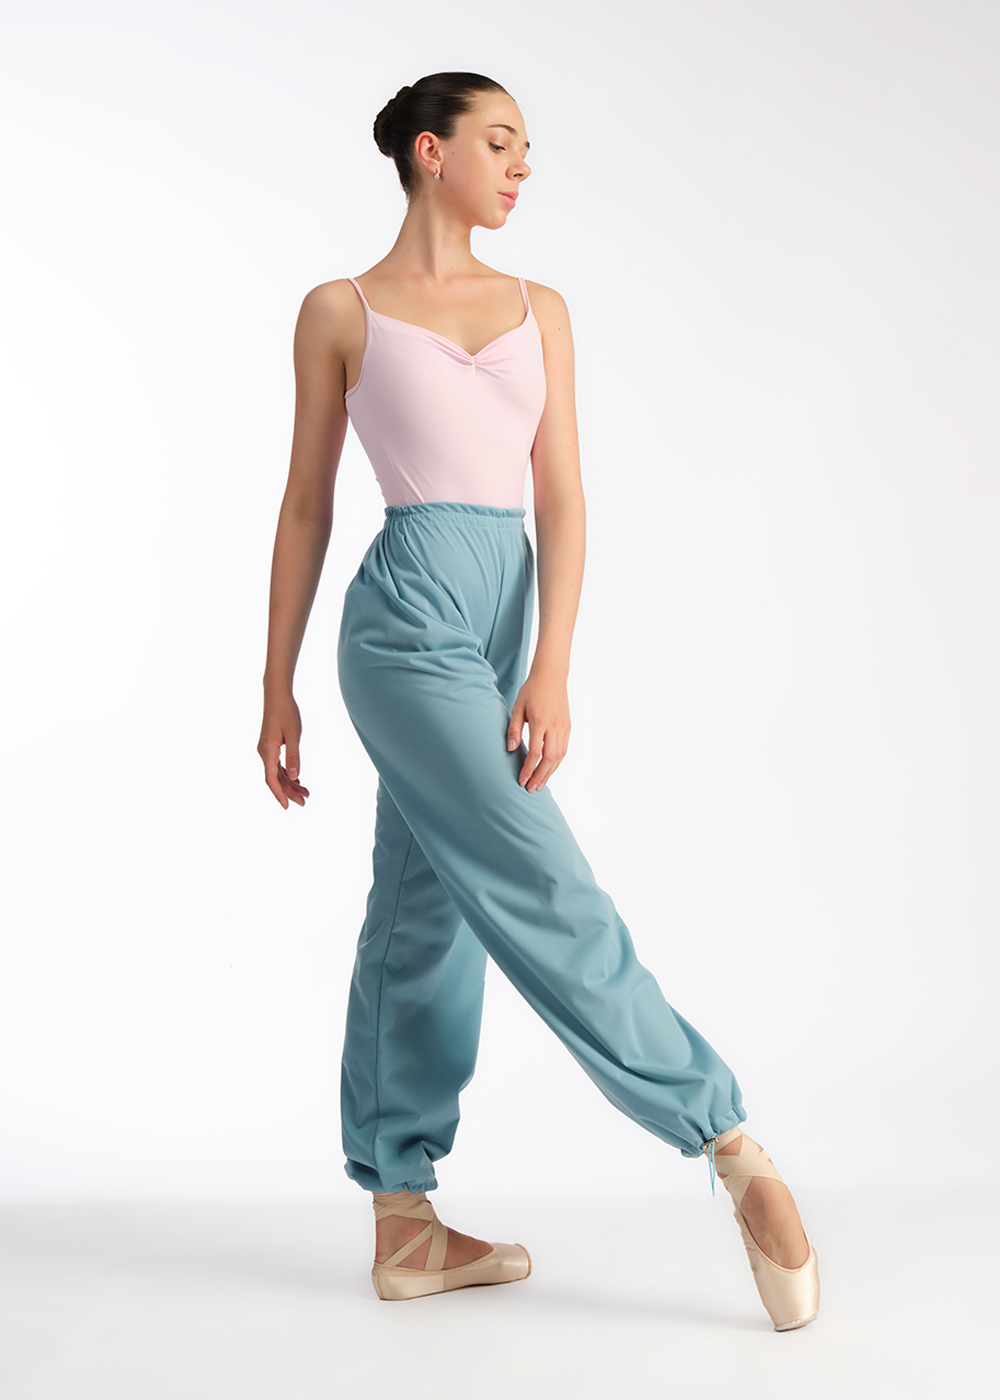 BLISS-1, Lady's warm-up pants (0405N)  Nikolay® - official online shop of  pointe shoes and dance apparel in the USA